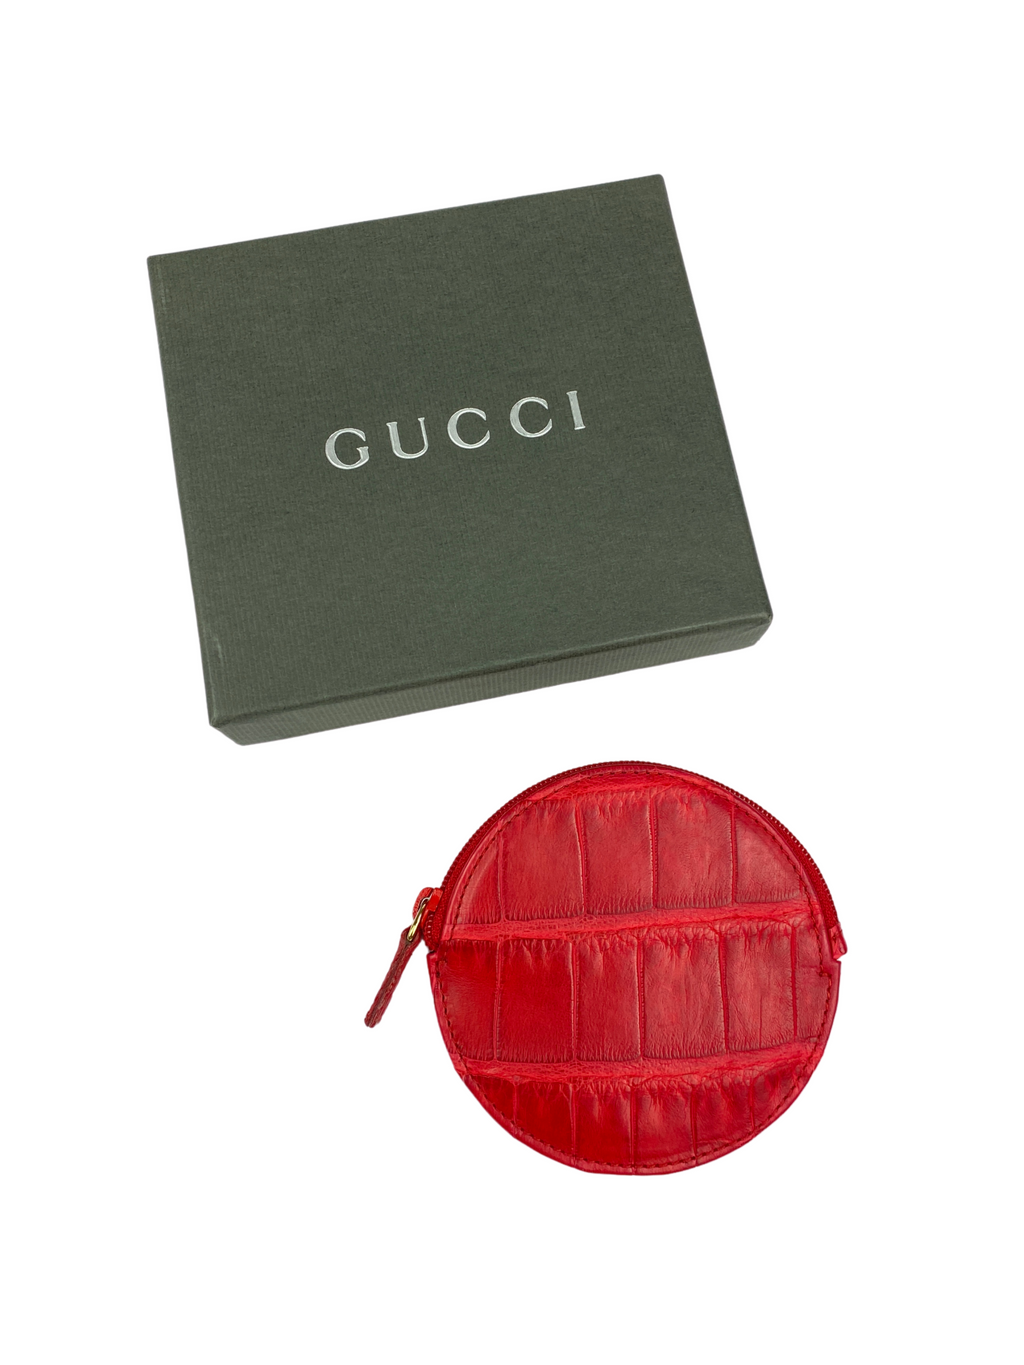 GUCCI - RED CROC EMBOSSED LEATHER COIN CASE